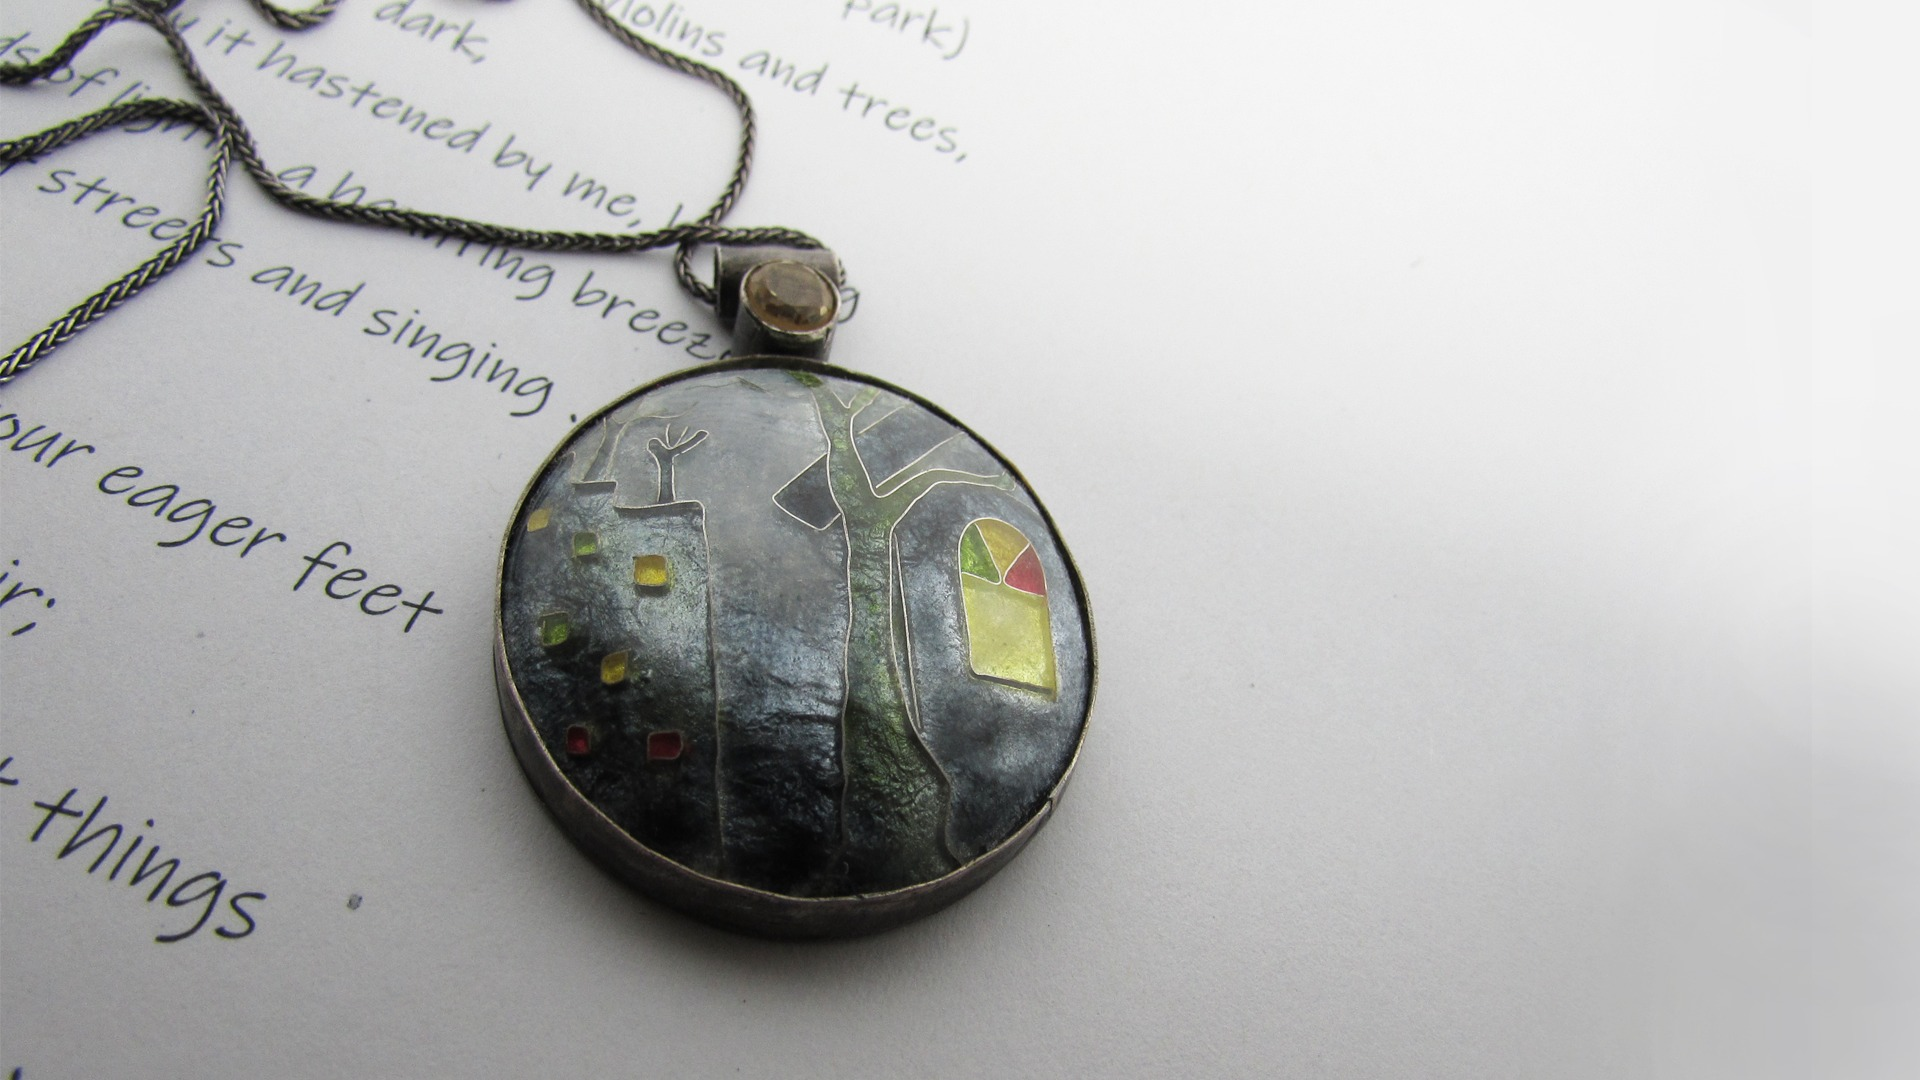 This pendant is made from silver, vitreous enamel and using a technique called cloisonné